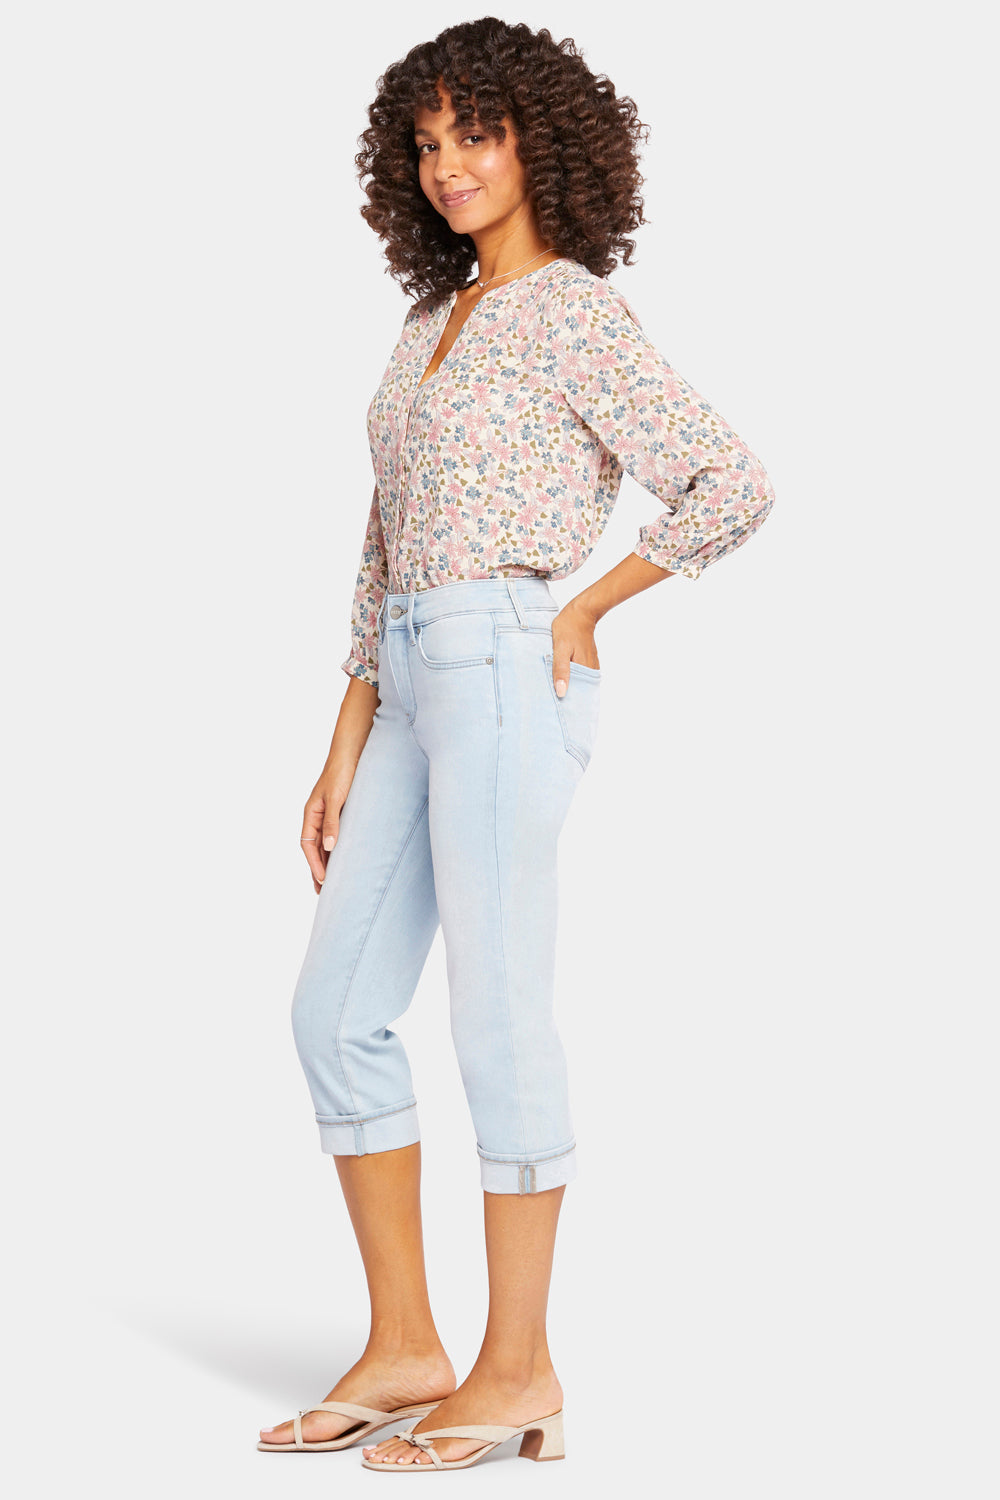 NYDJ Marilyn Straight Crop Jeans In Petite In Cool Embrace® Denim With Cuffs - Brightside